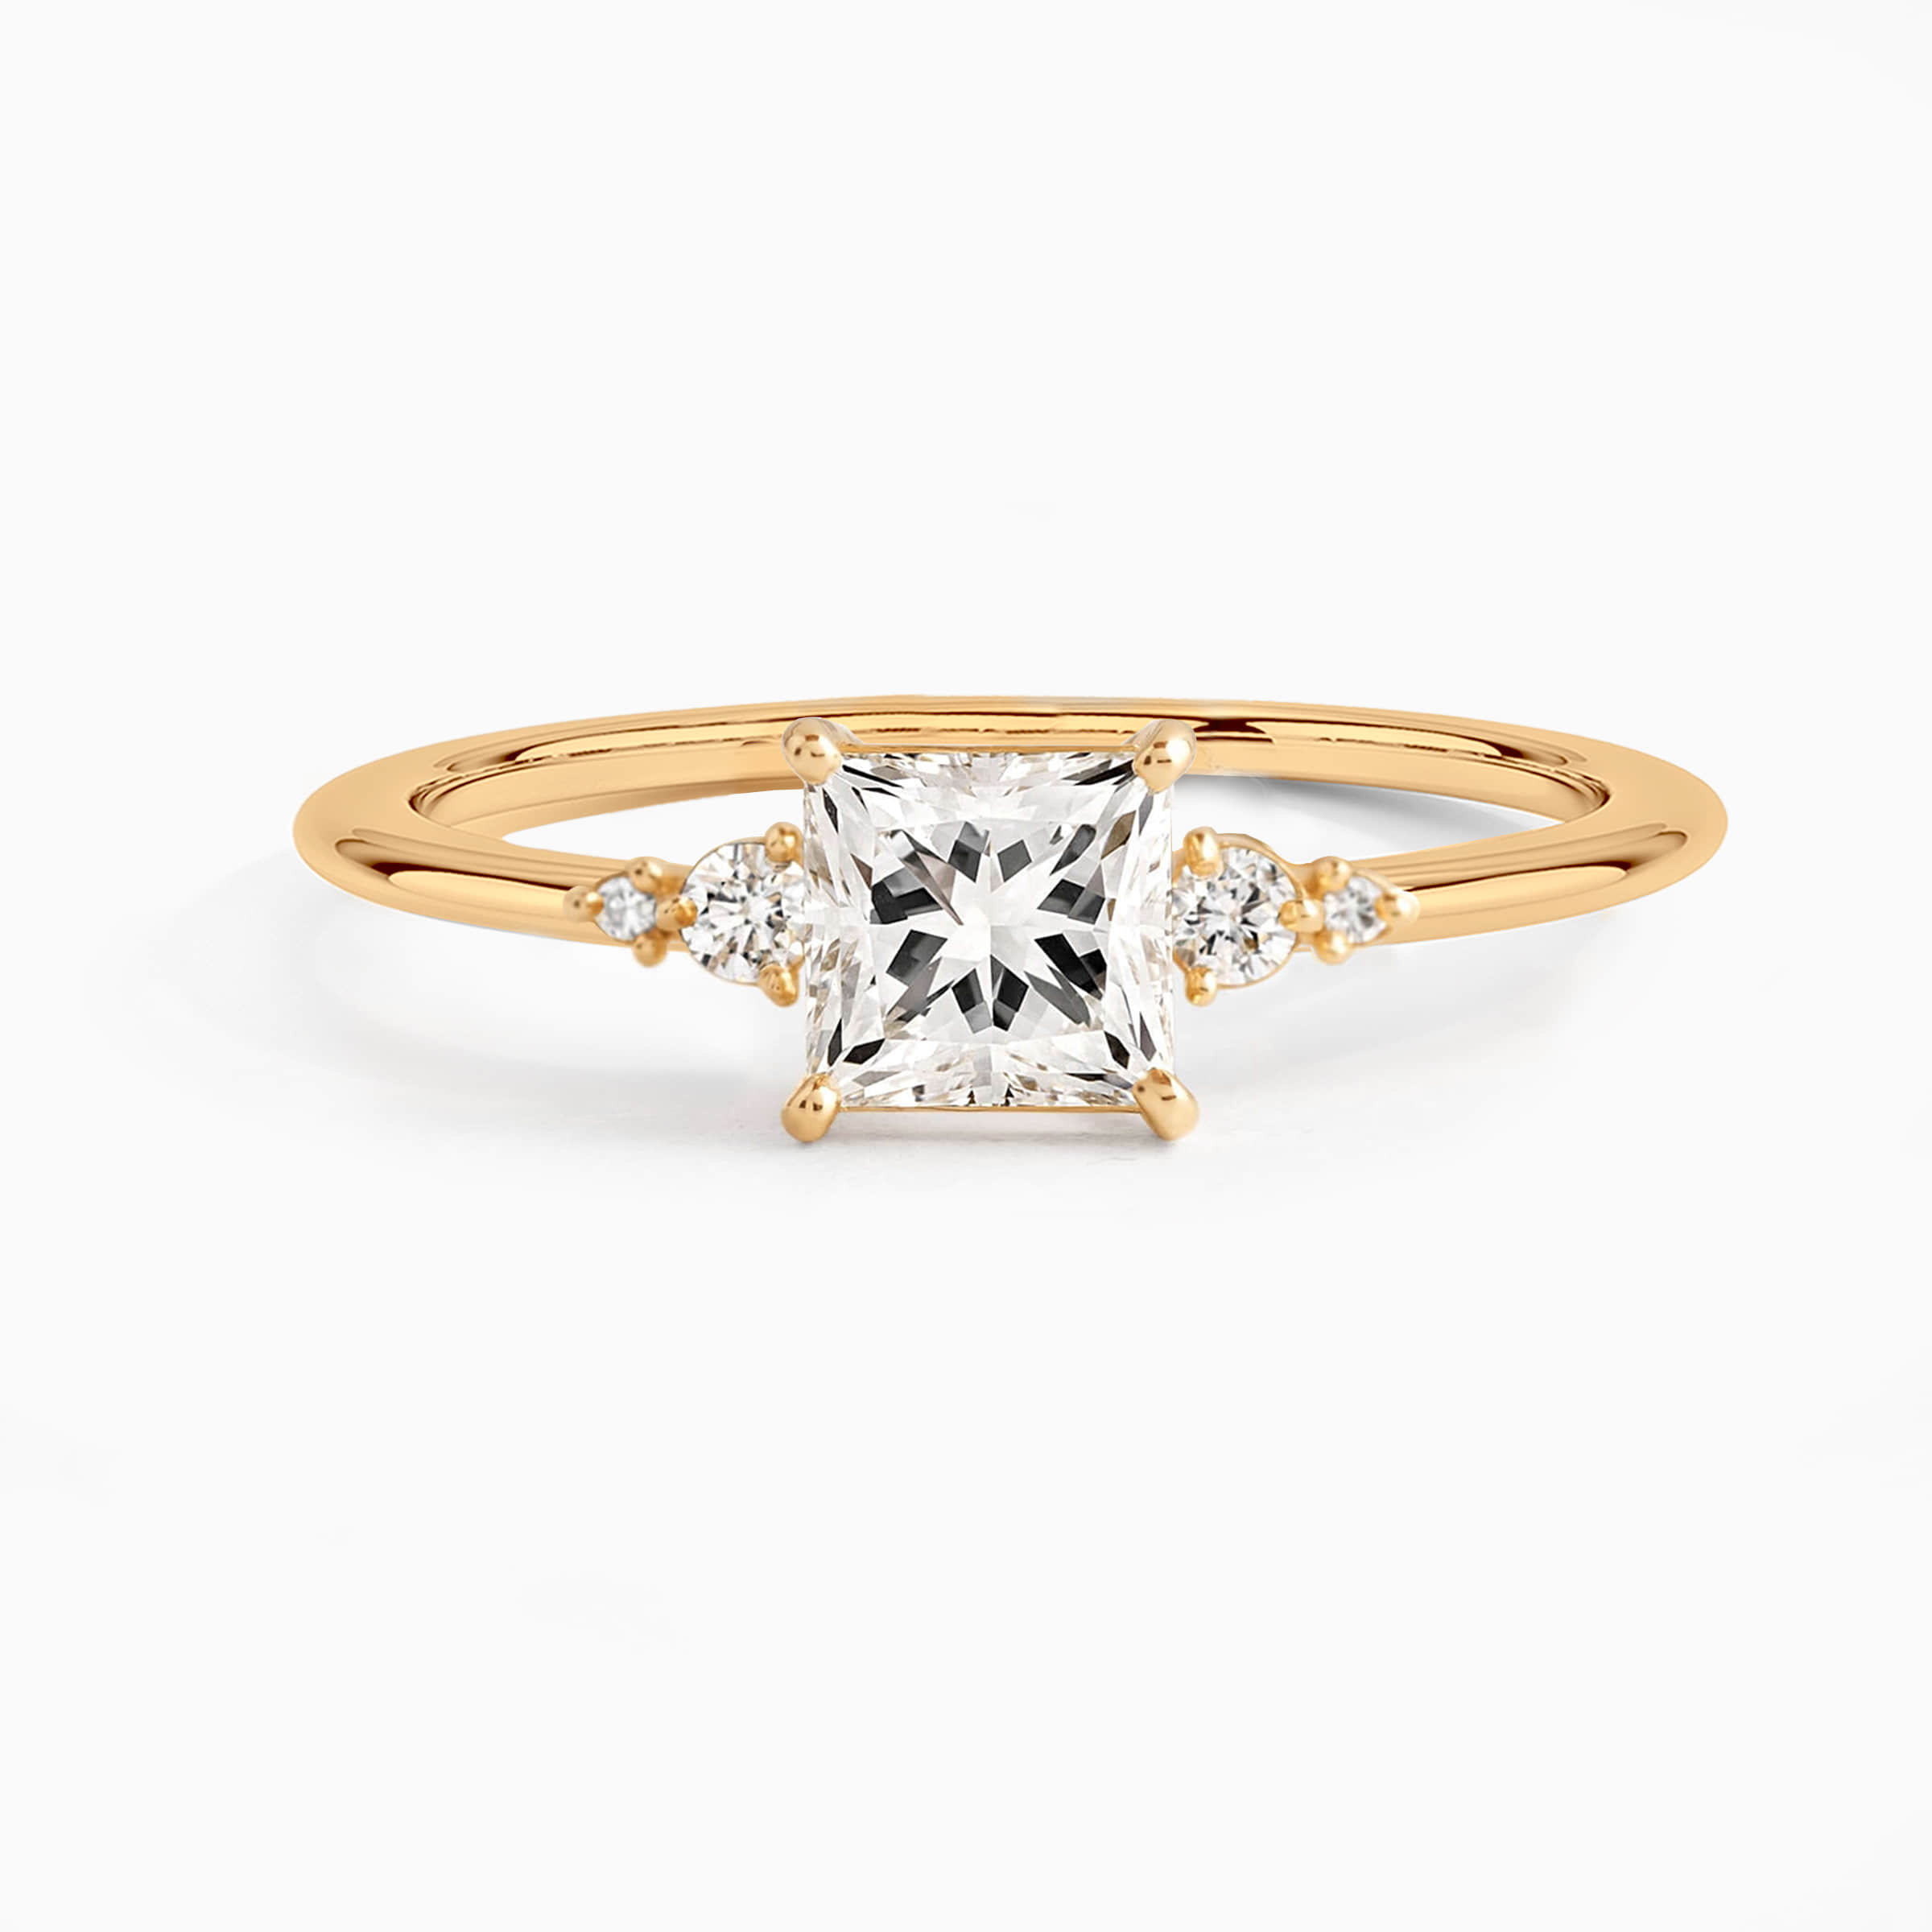 Darry Ring princess cut engagement ring in yellow gold